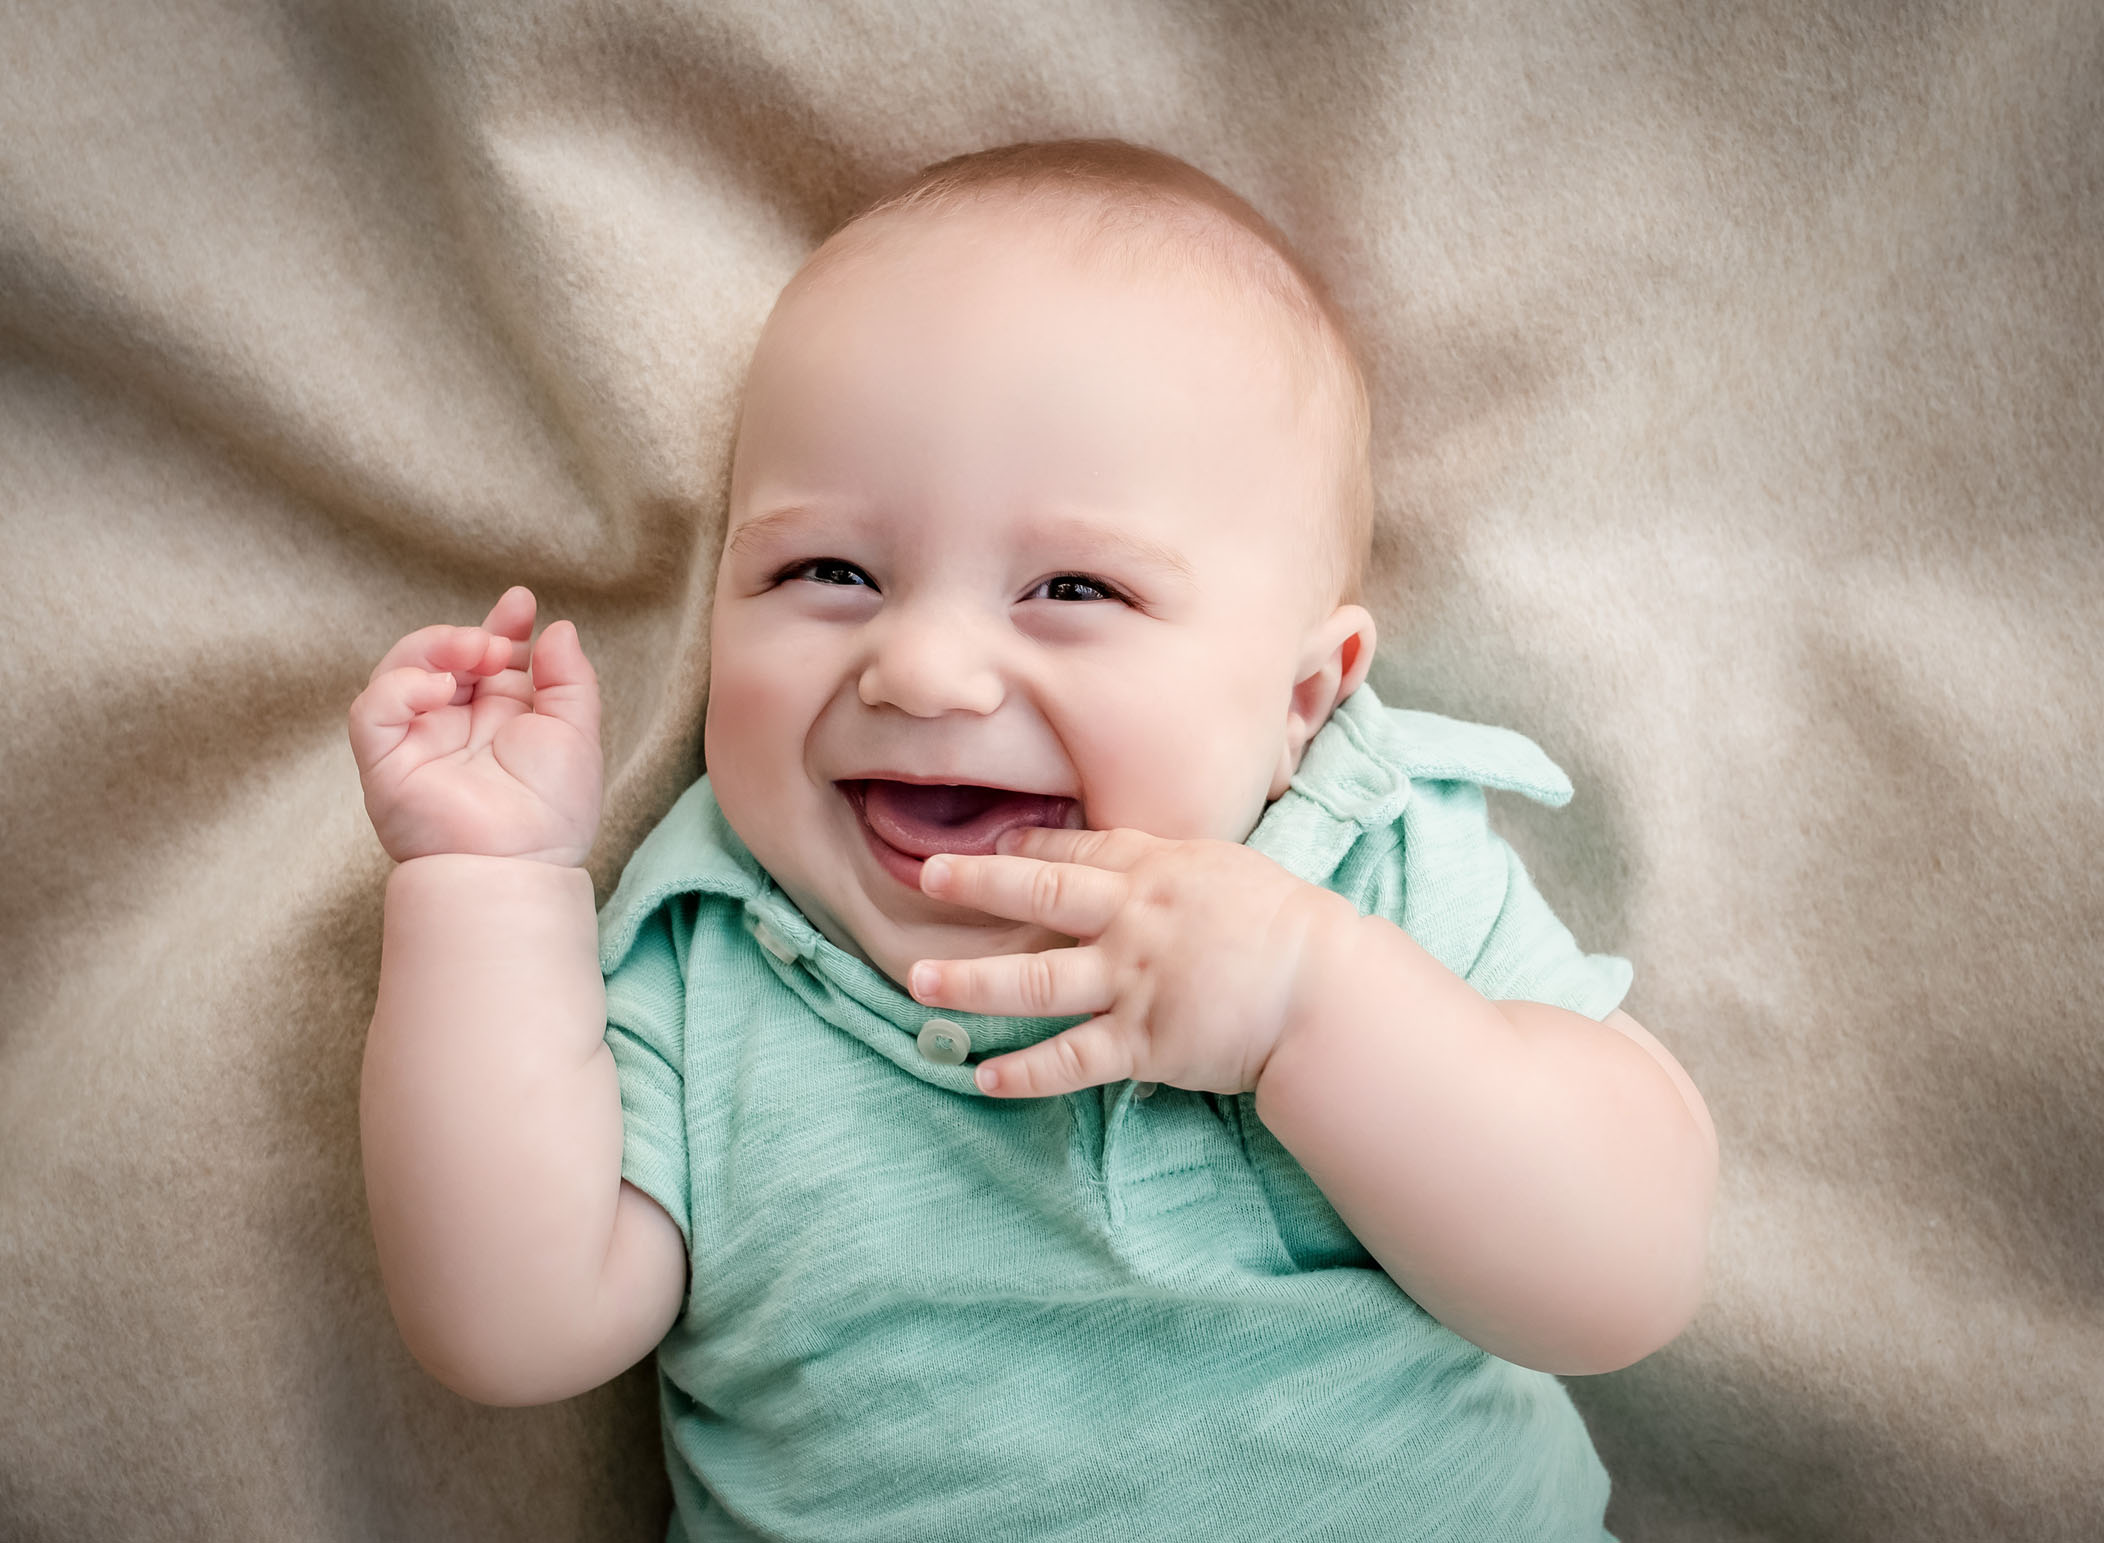 6 month old baby boy laughing with his fingers in his mouth